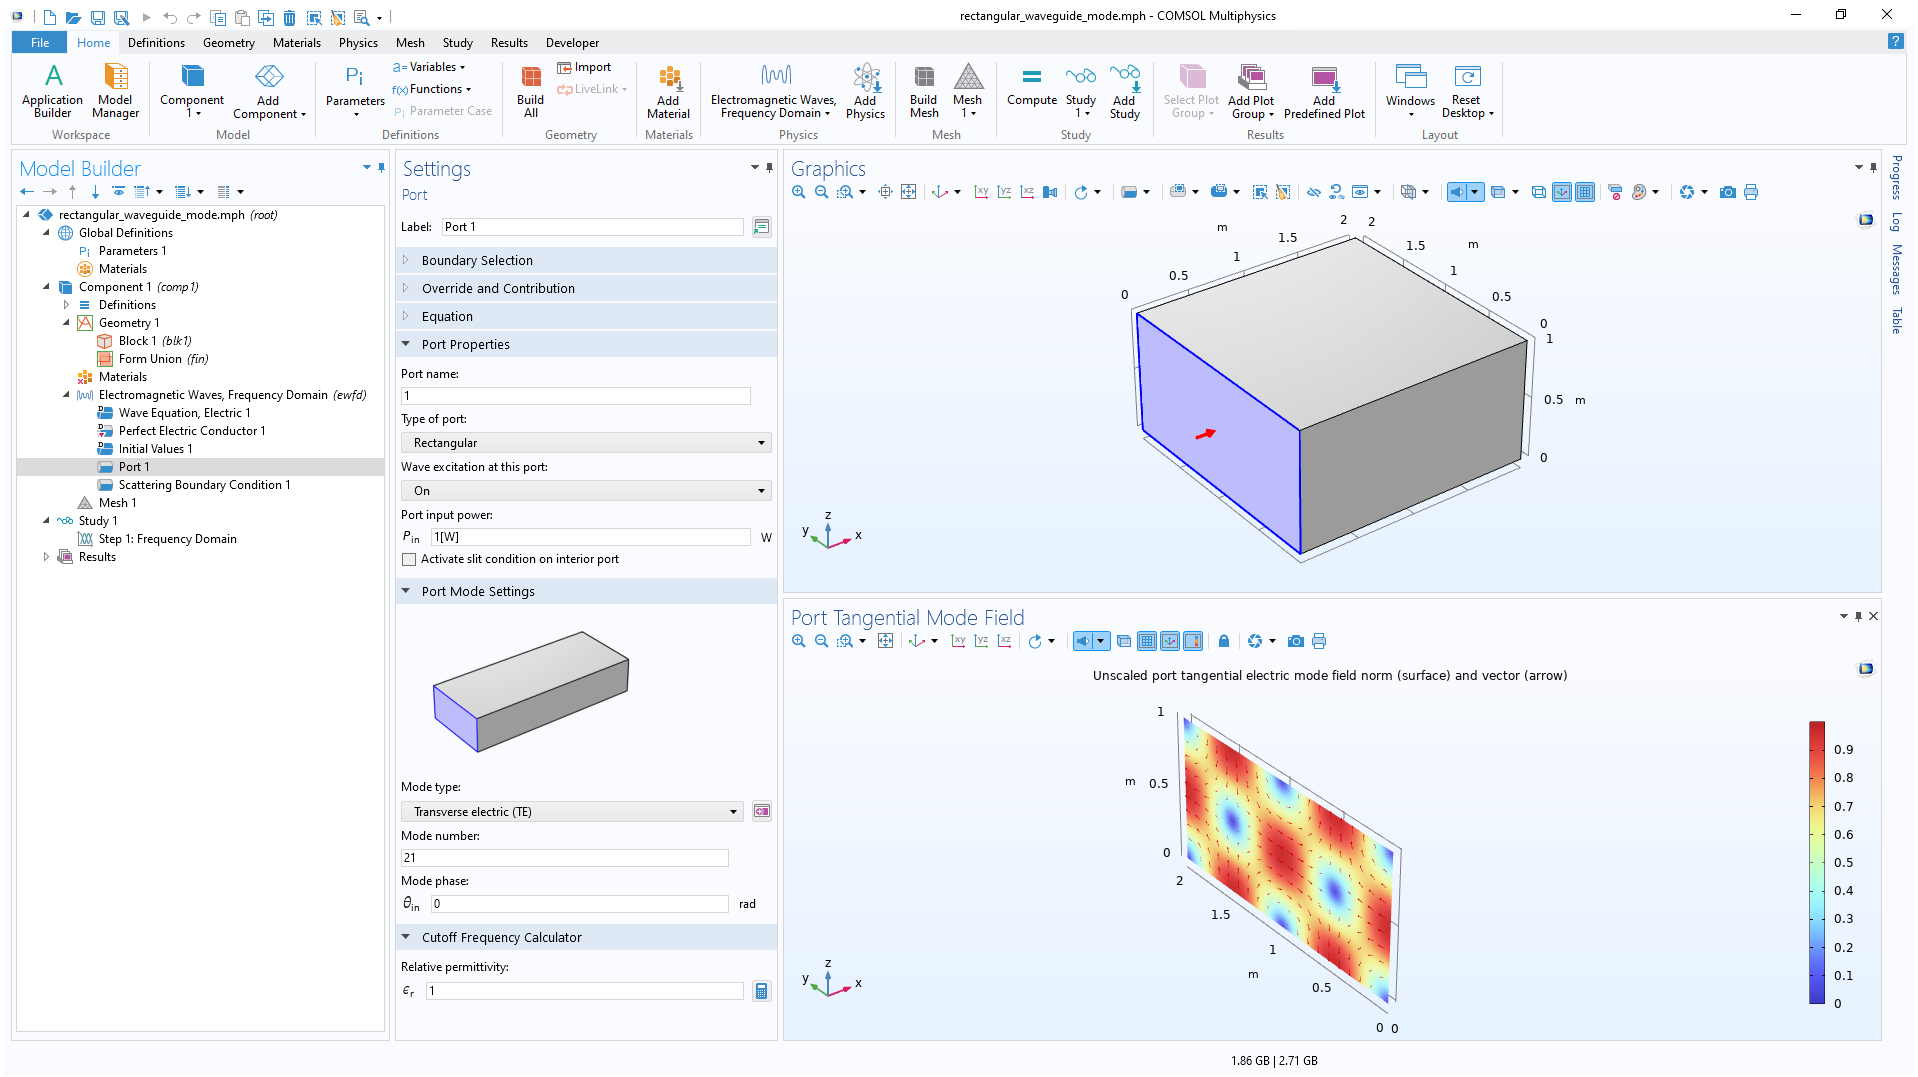 The COMSOL Multiphysics UI showing the Model Builder with the Port condition selected, the corresponding settings, a Graphics window with a rectangular waveguide model, and a second Graphics window showing an electric field in the Rainbow color table.